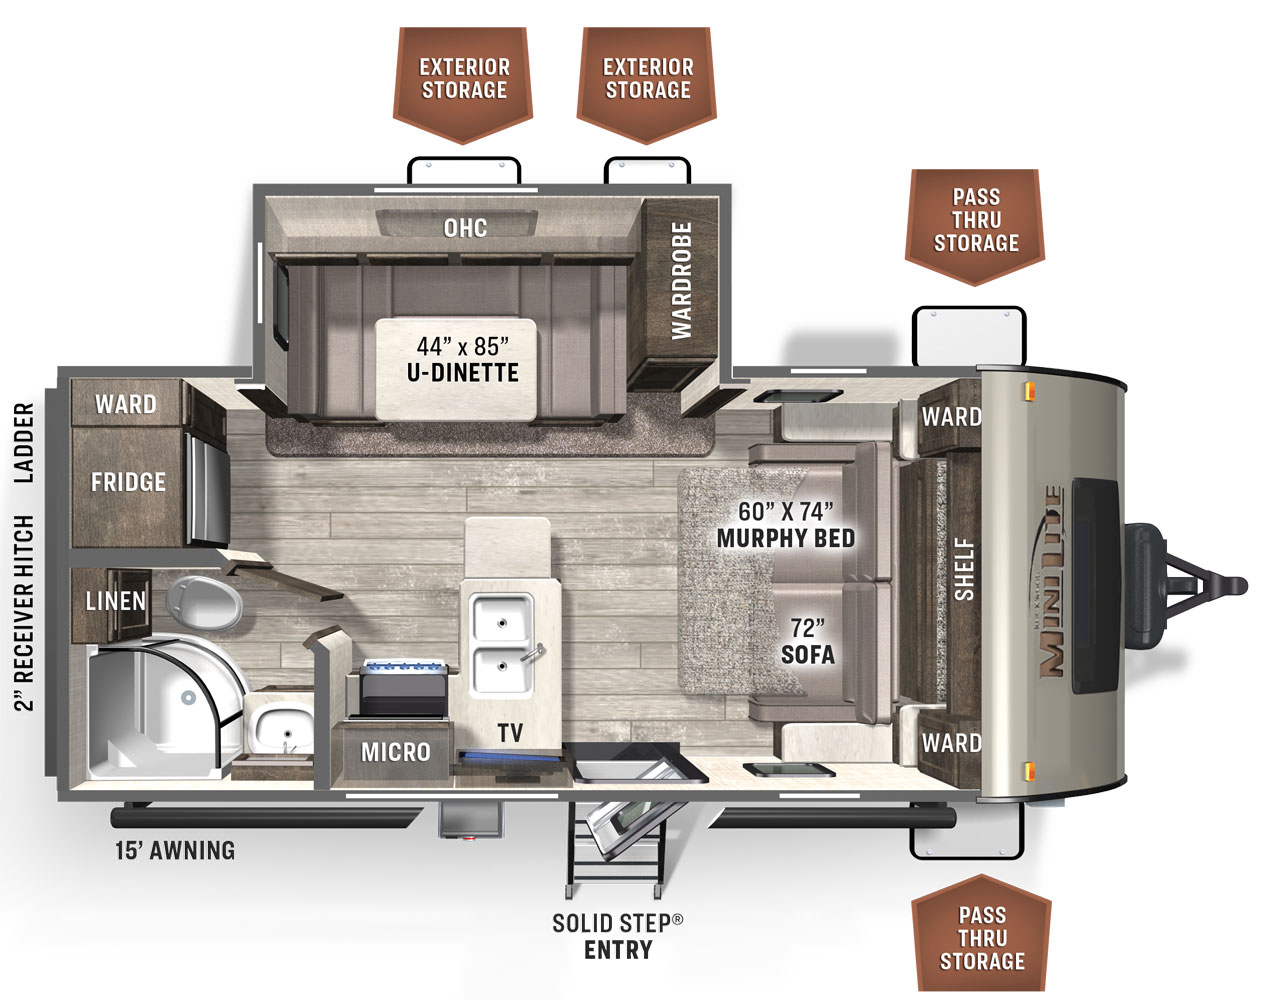 The 2014S has one slide out on the off-door side, along with one entry door. Exterior features include a 15 foot awning, pass thru storage, and exterior storage. Interior layout from front to back: front bedroom with 60 x 74 inch murphy bed, 72 inch sofa, and overhead cabinets; off-door side slide out containing a u-dinette, overhead cabinets, and a wardrobe; kitchen living area with countertops, double sink, a stove, and a microwave; community refrigerator, ward, and bathroom in the rear.